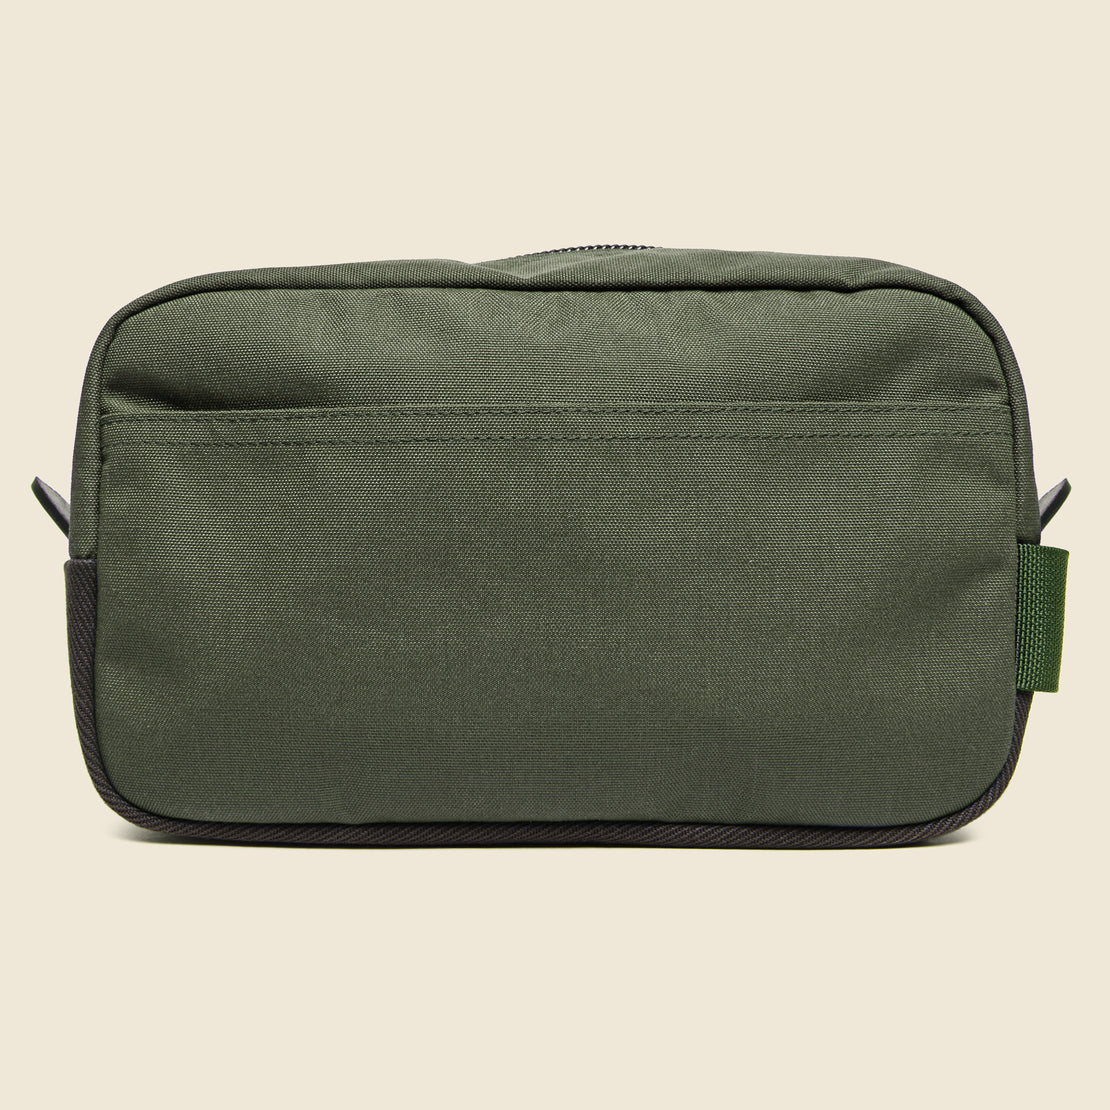 Travel Pack - Otter Green - Filson - STAG Provisions - Accessories - Bags / Luggage